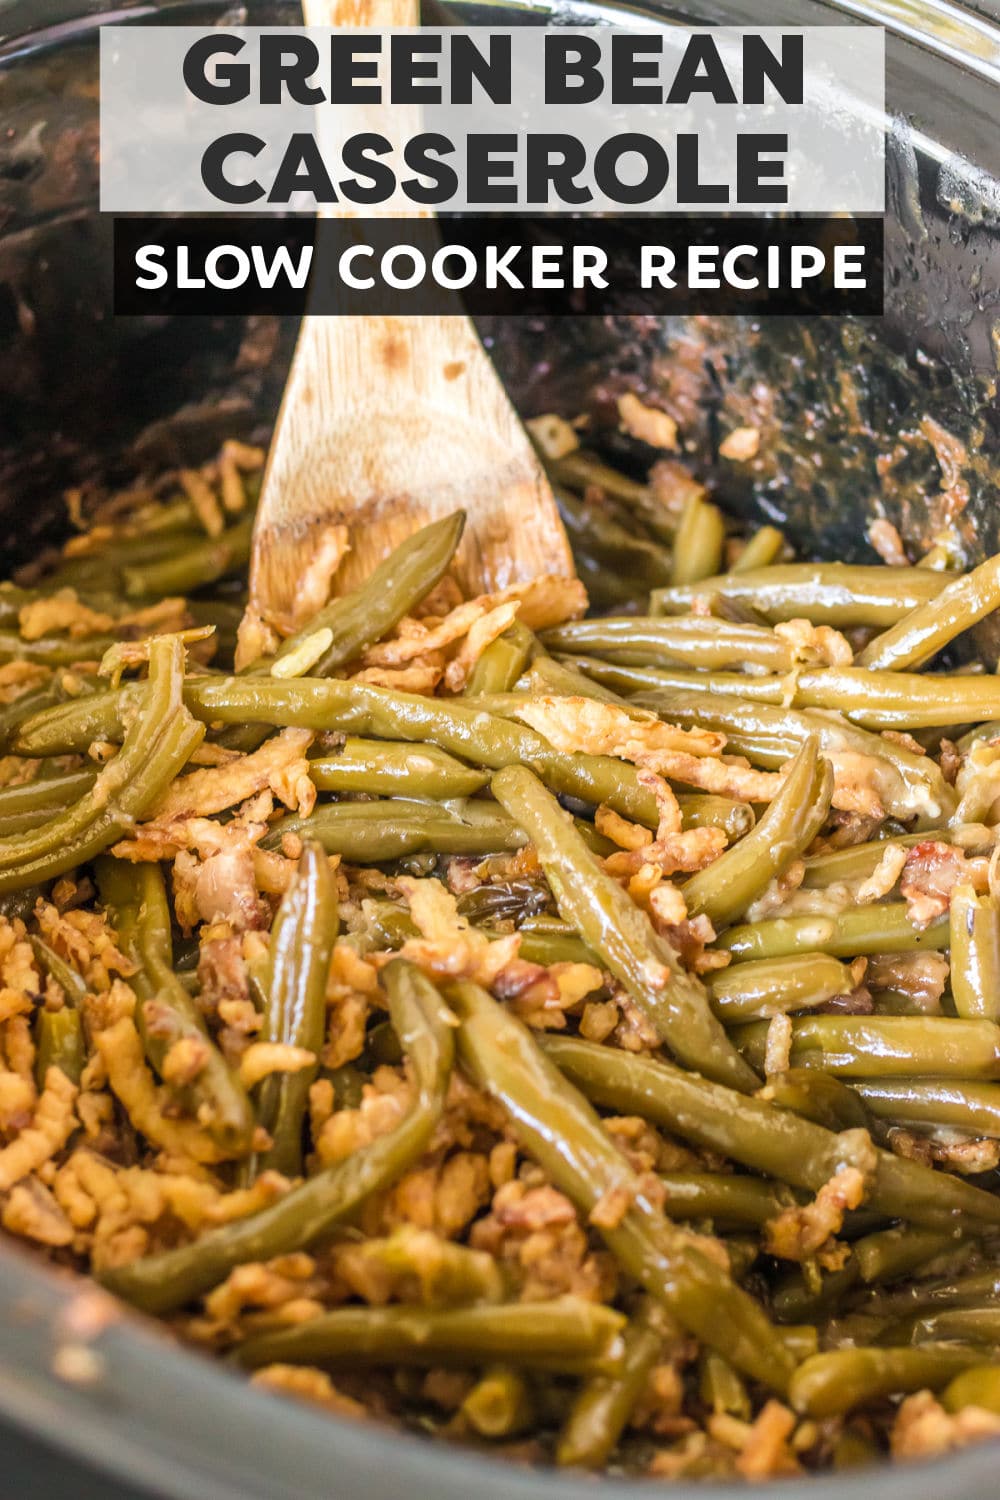 Slow cooker green bean casserole is so easy to make from scratch – without any canned soup! This comfort food classic recipe uses fresh green beans, has a creamy, bacon-filled sauce, is topped with crispy fried onions and is made right in the crockpot. This dish serves a crowd and comes out perfect every time. | www.persnicketyplates.com